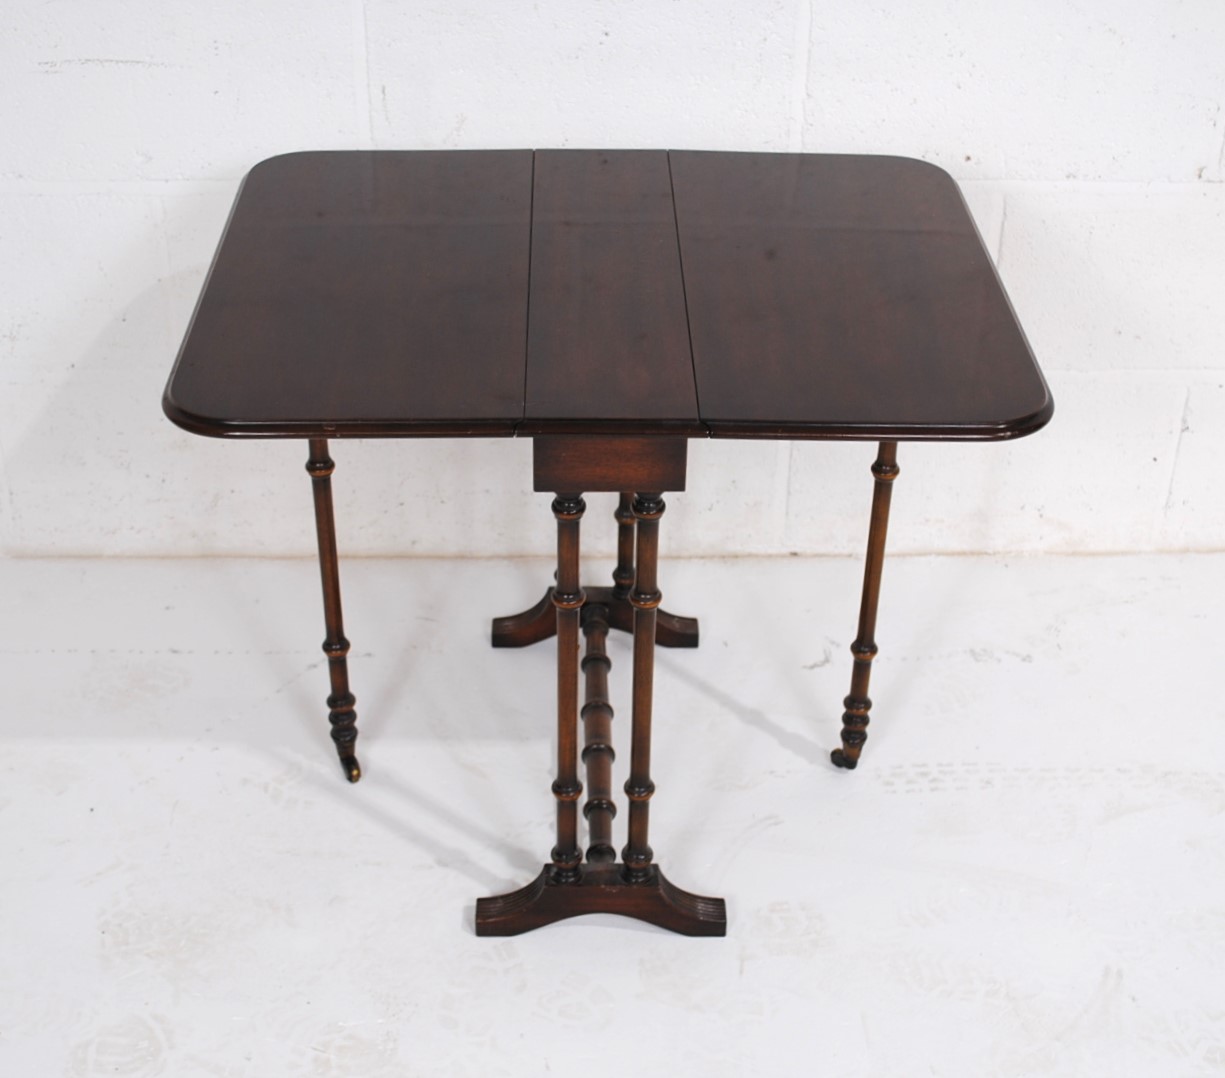 A mahogany Sutherland table, with turned legs, marked 'The Thomas Glenister Company' - Image 4 of 6